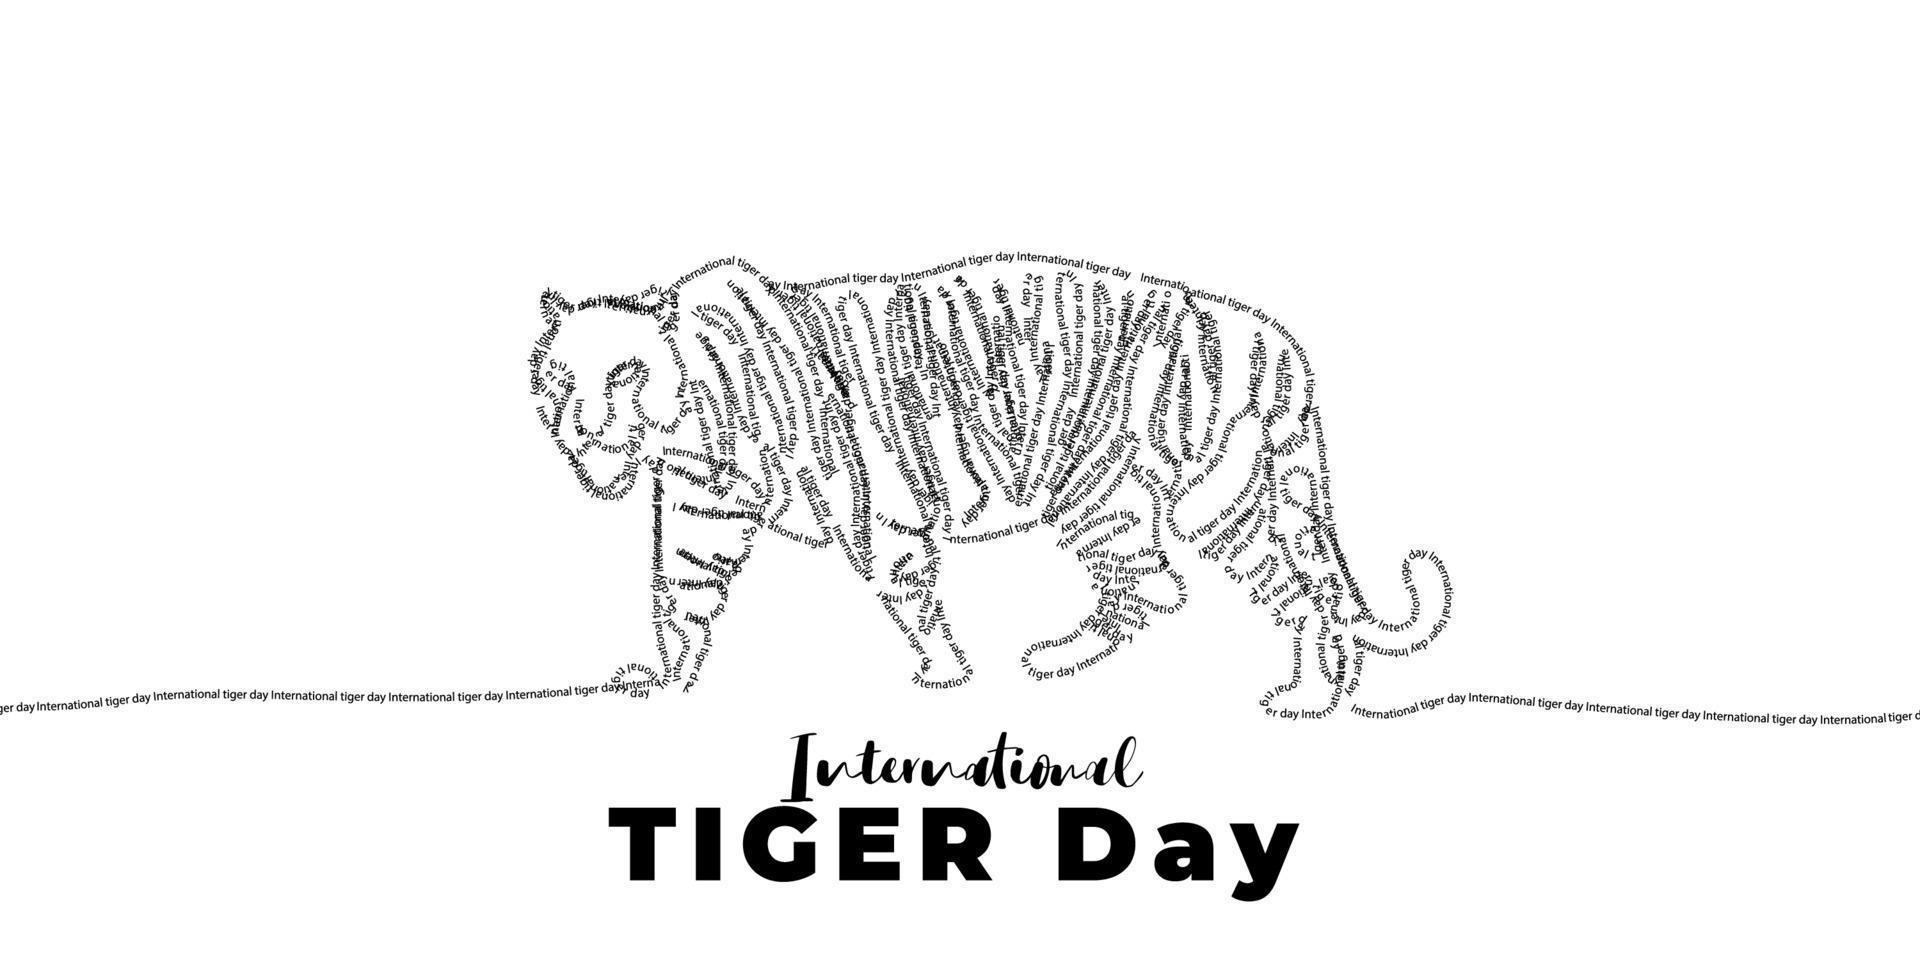 International tiger day awareness for conservation vector